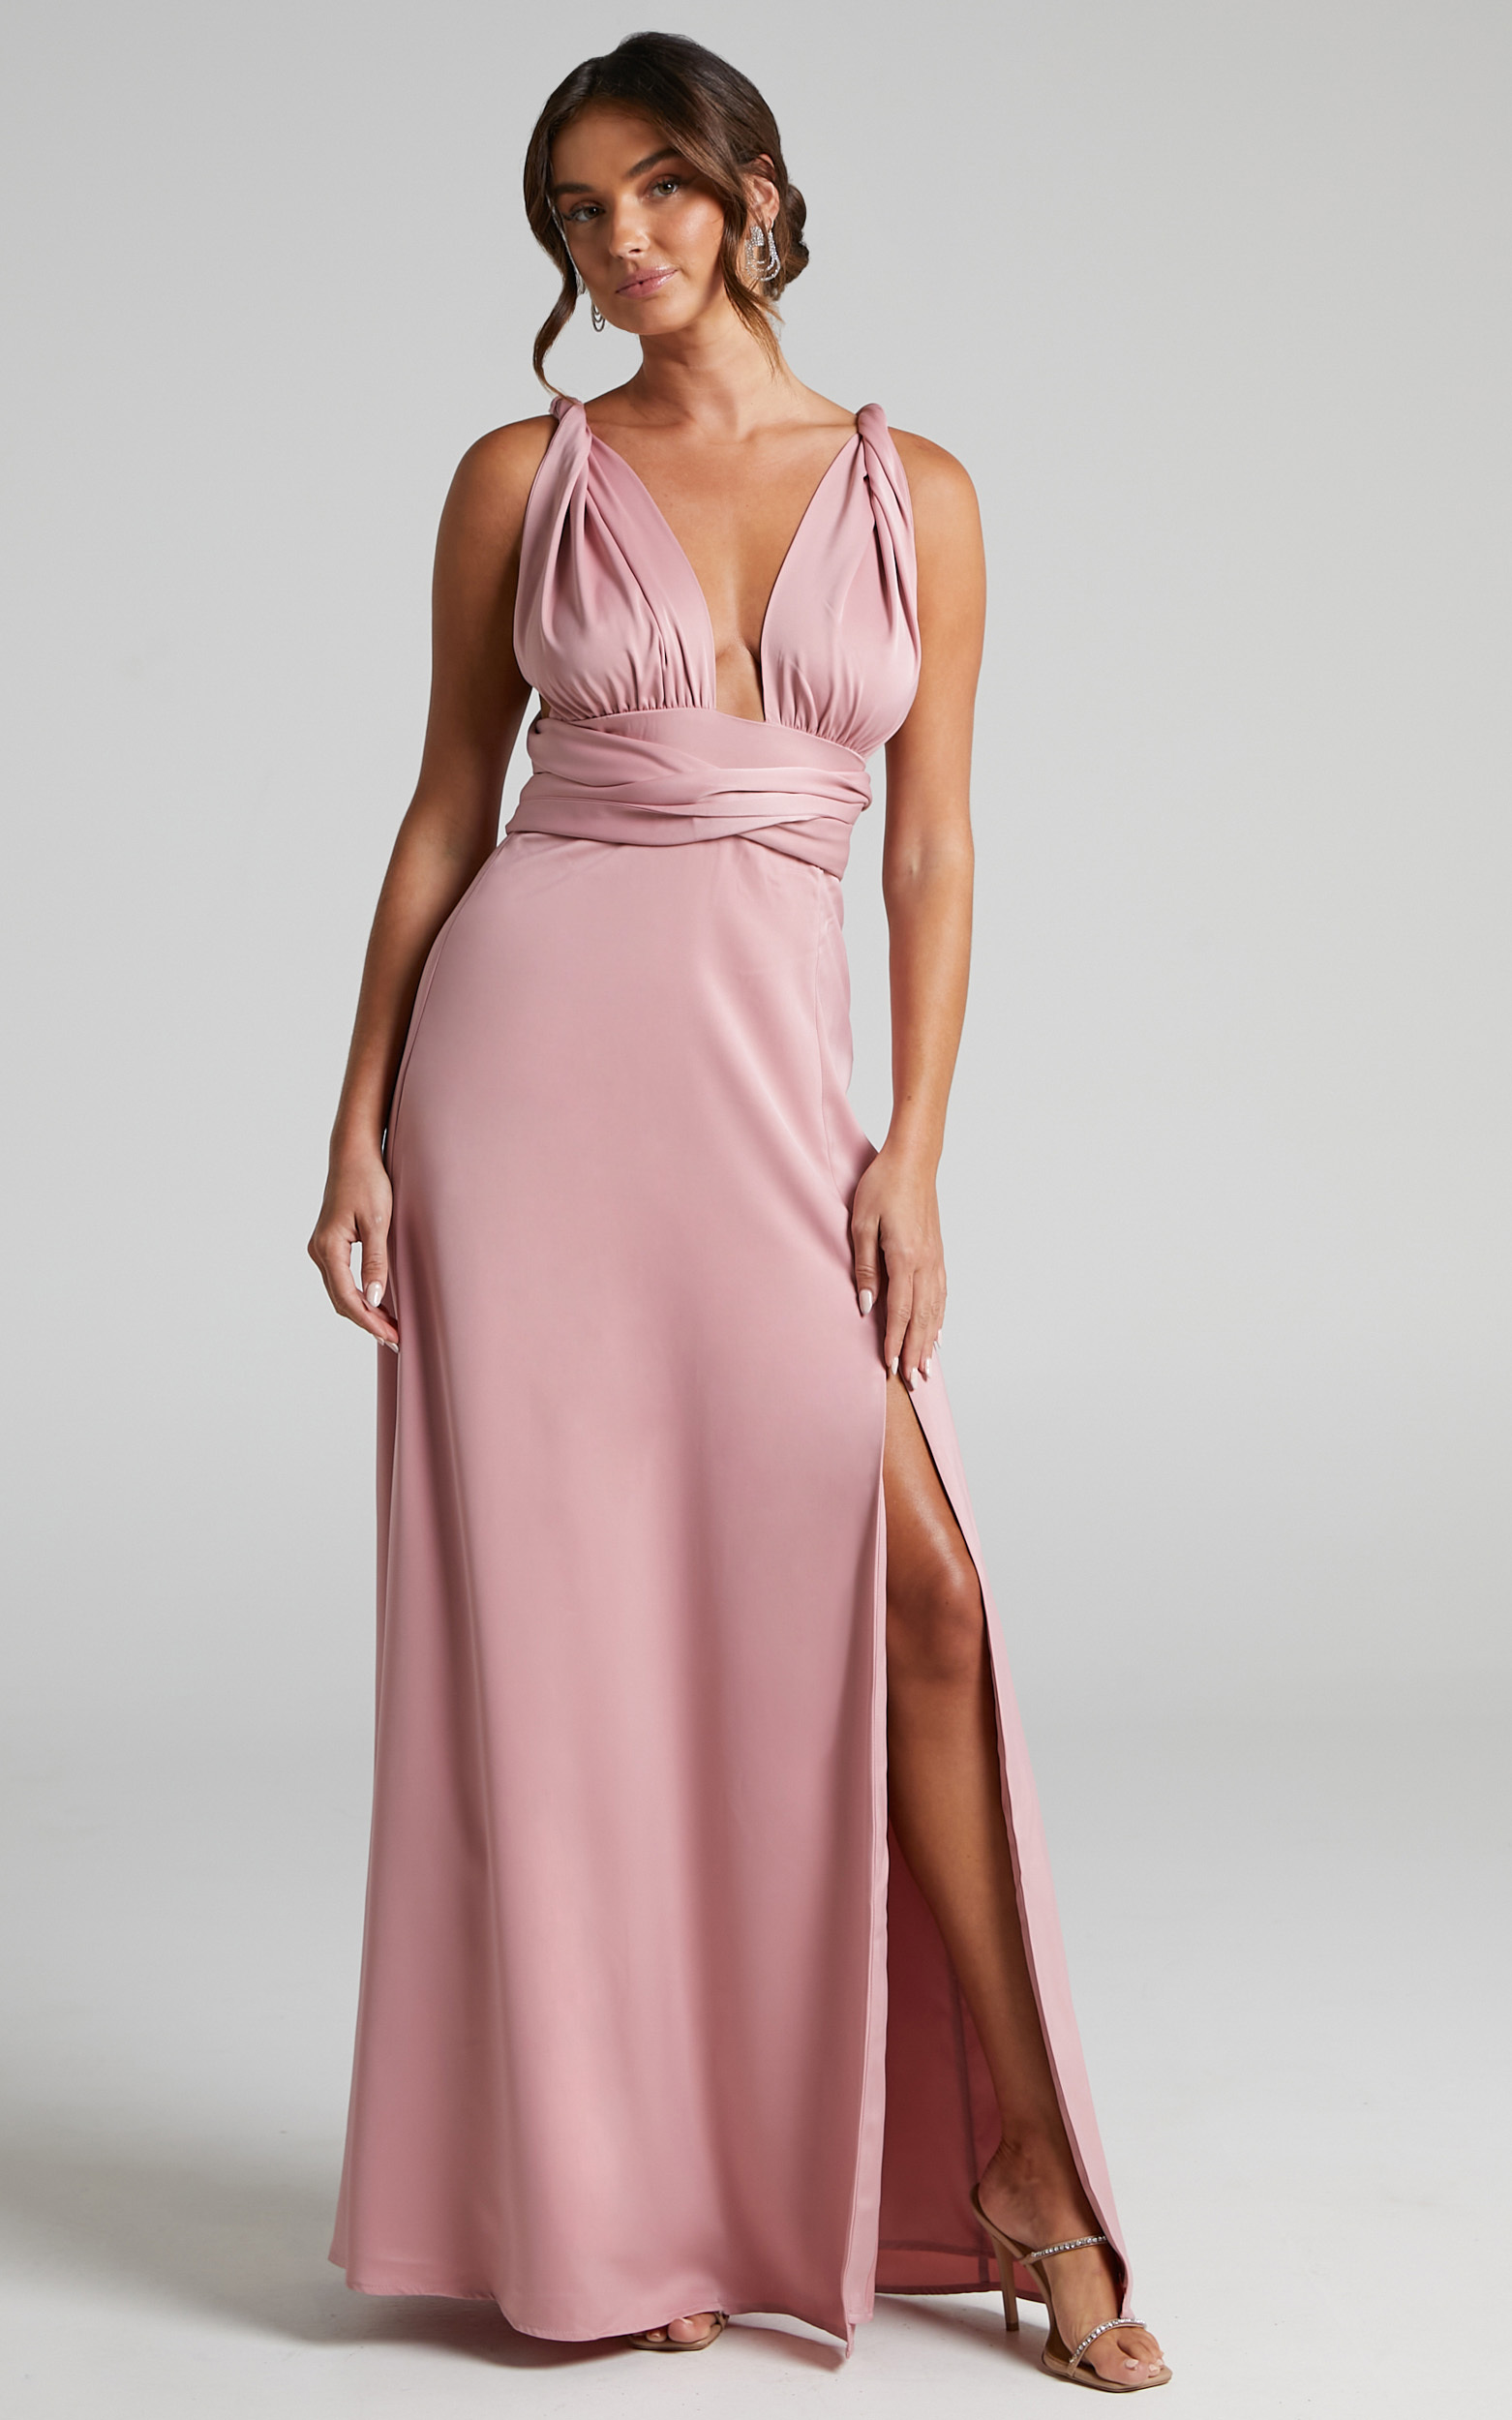 Whimsical Dream Multi Tie Maxi Dress in Blush - 04, PNK1, hi-res image number null